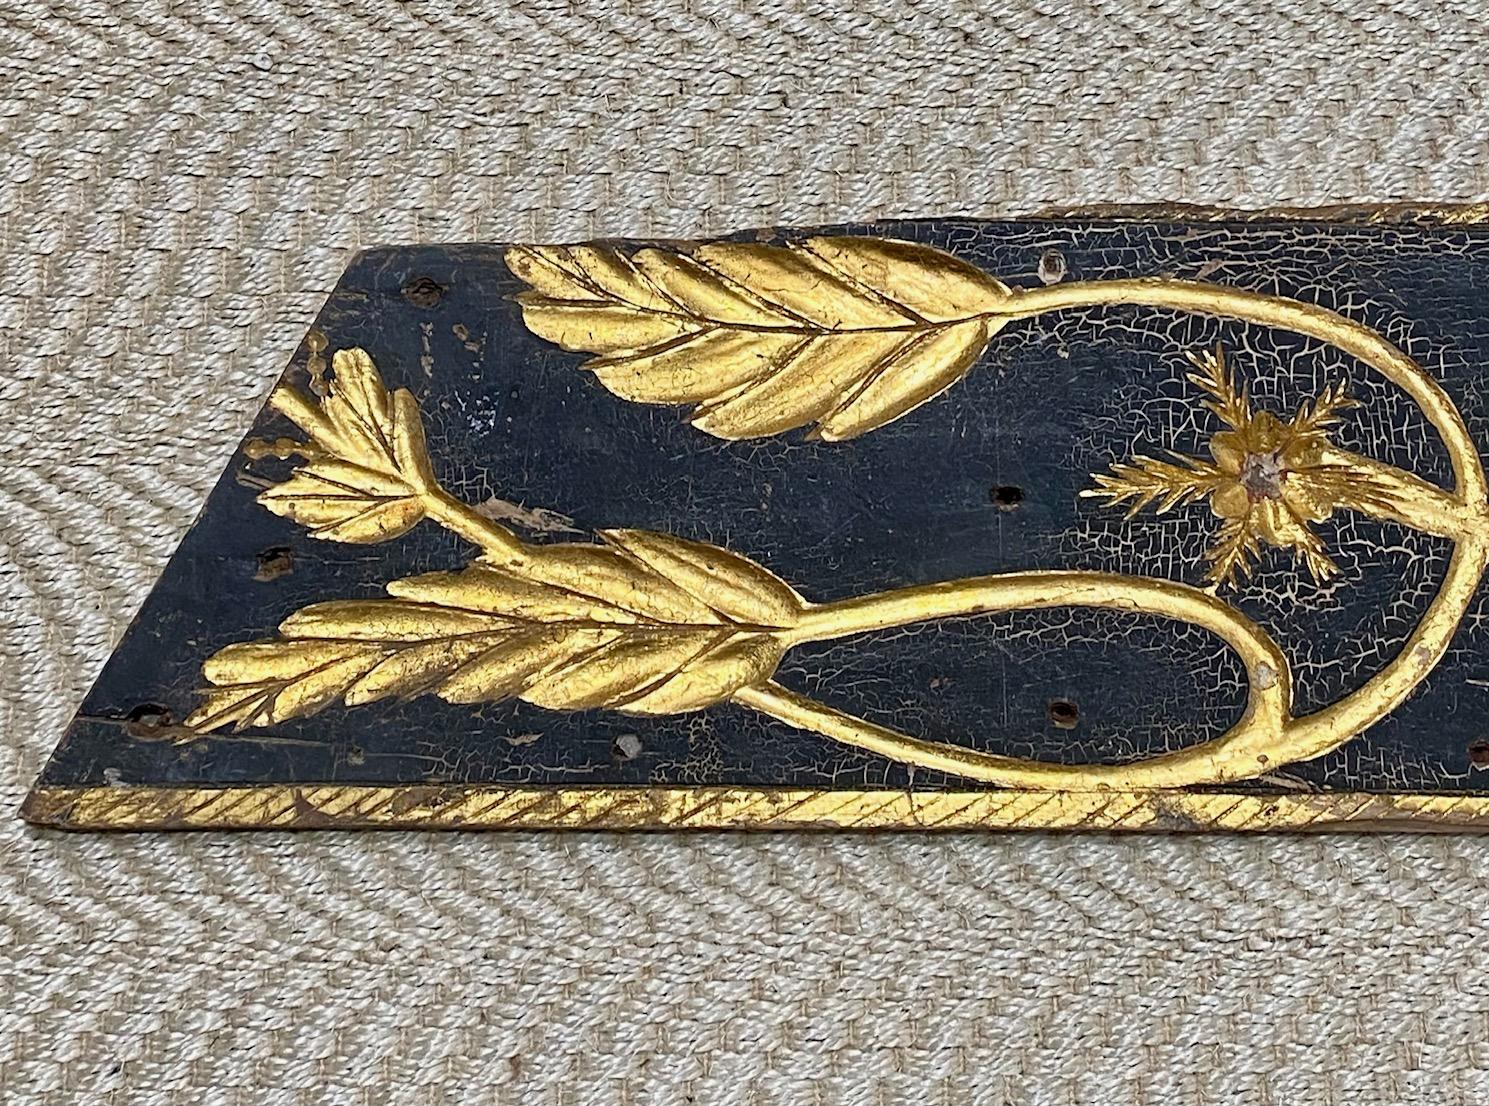 19th Century Hand Carved Ship's Carved and Gilded Trailboard, Second Half 19th Century, a carved and shaped plaque that is upswept and narrowing towards the tip, with incised or sunken relief carved and gilded foliate scrolls, petal rosettes and